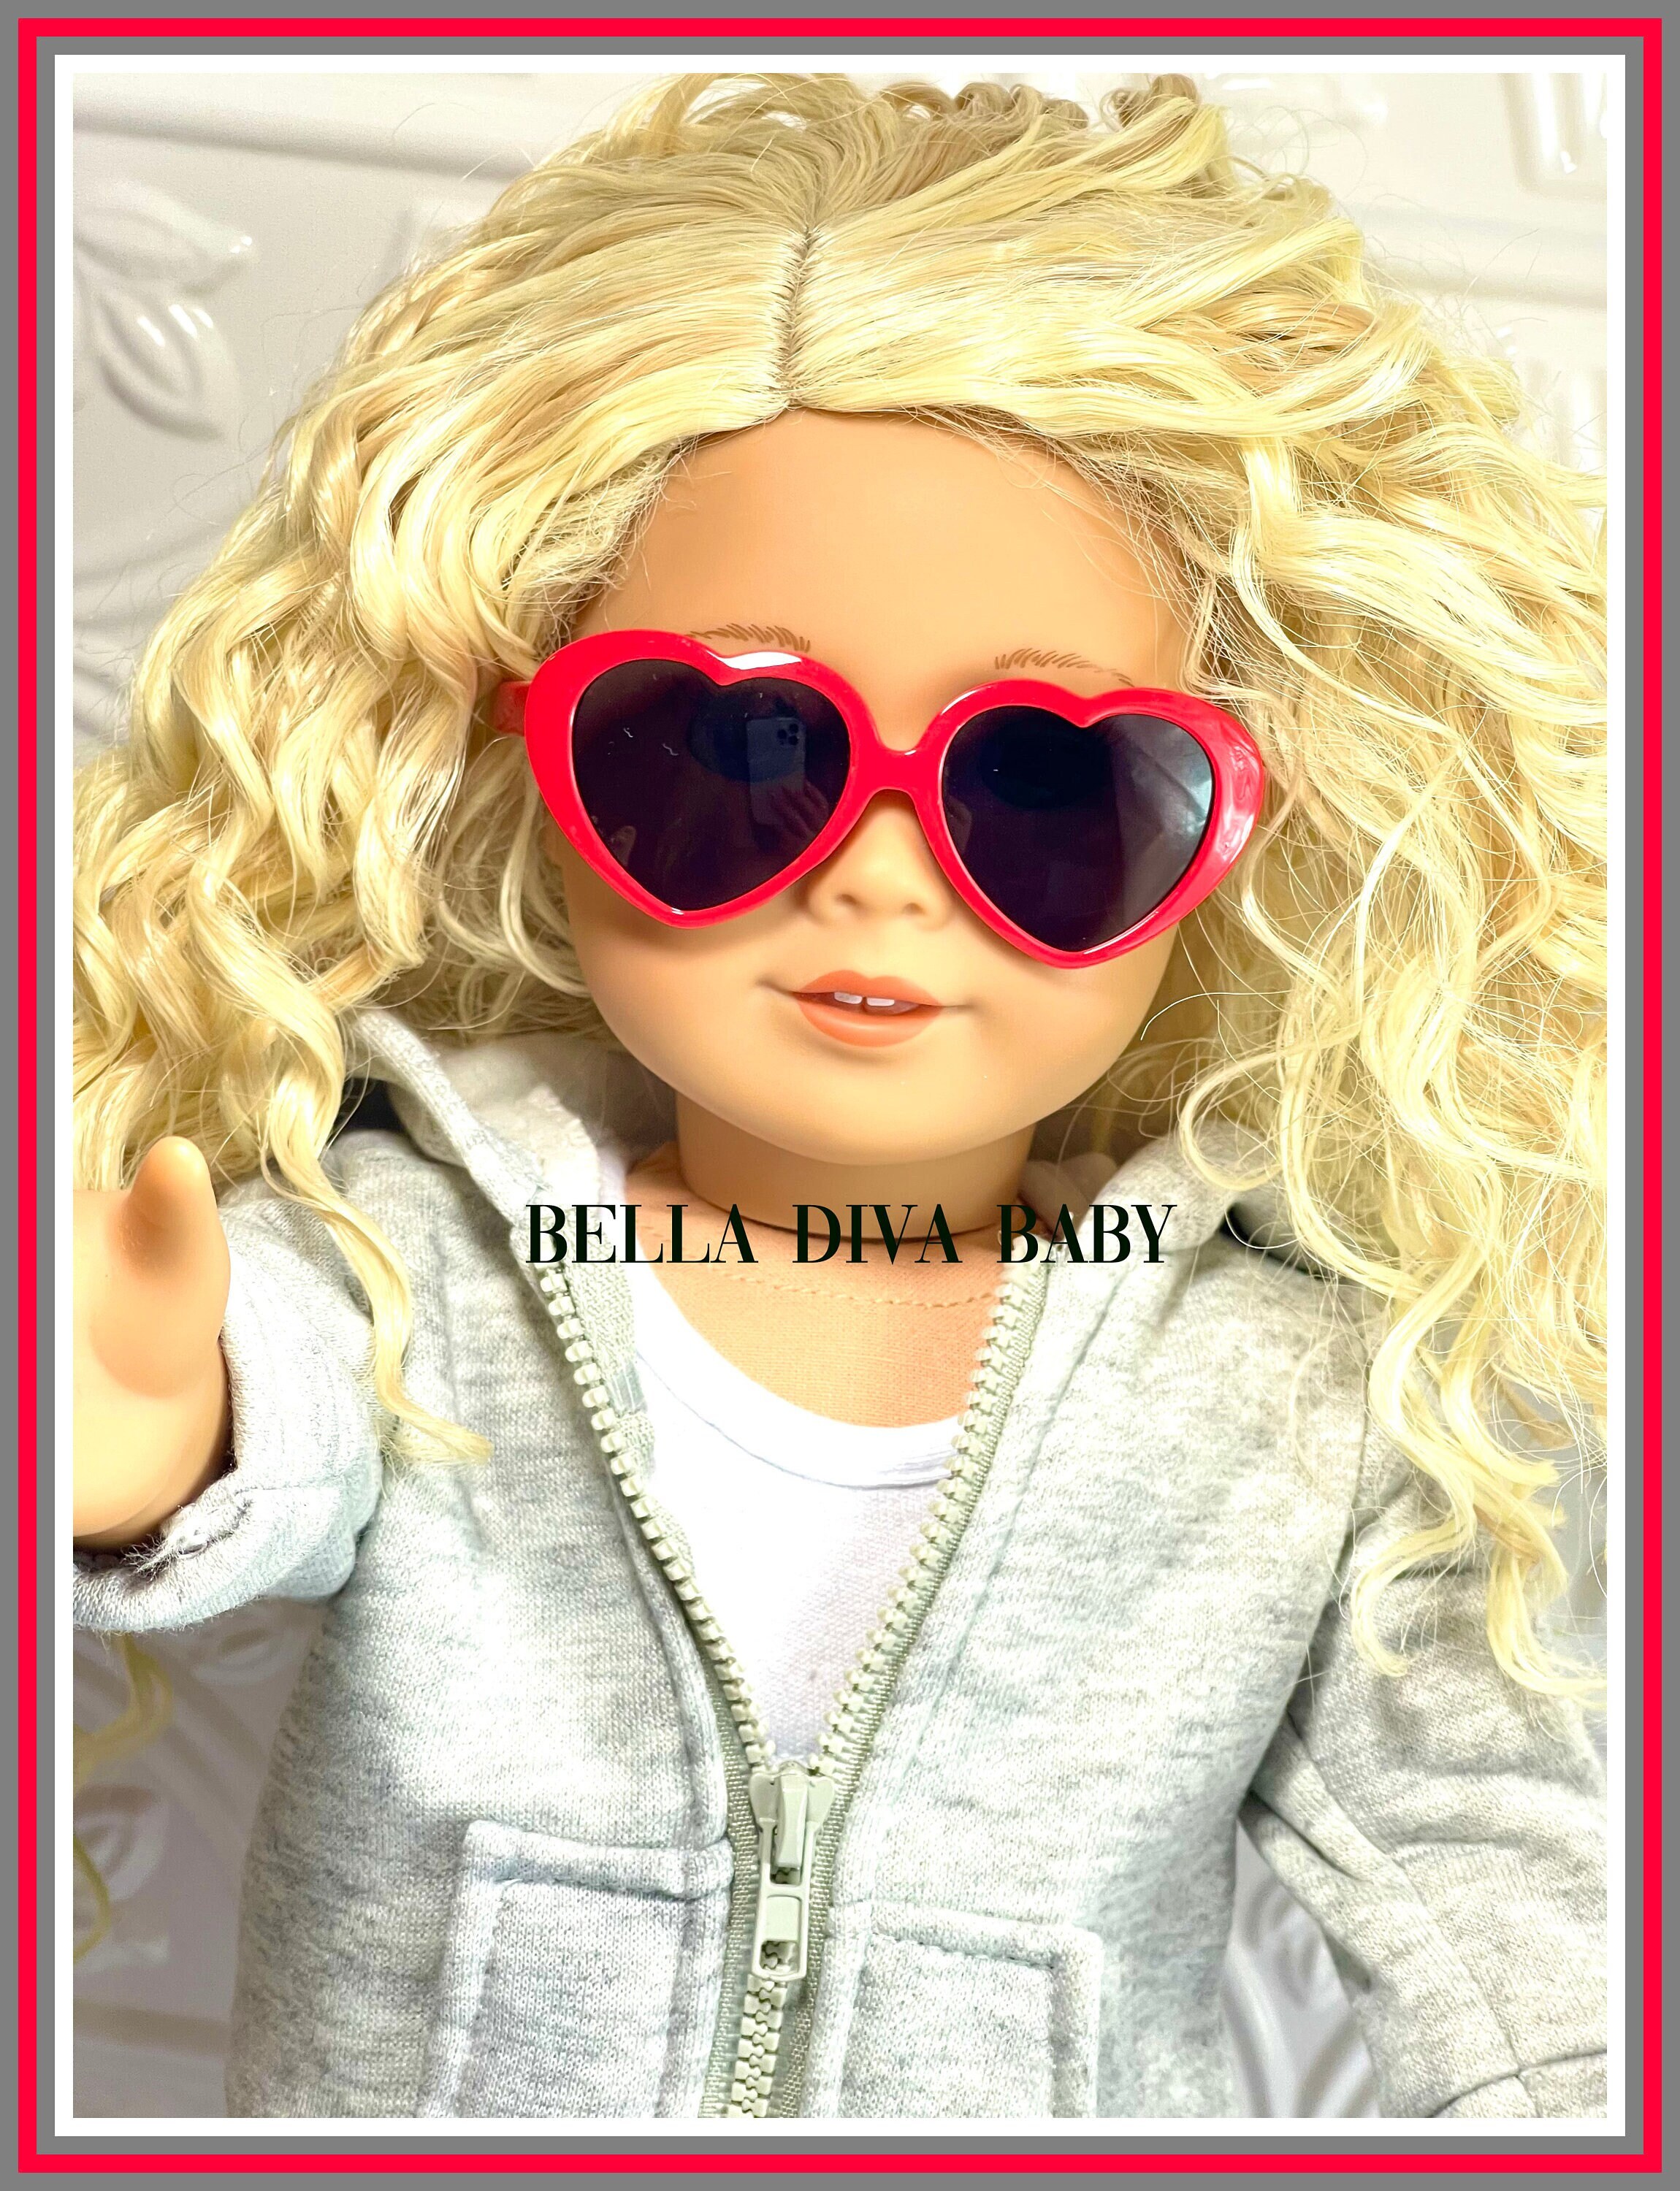 TOYBARN : Officially Licensed L.O.L. Surprise! Baby Doll Sunglasses